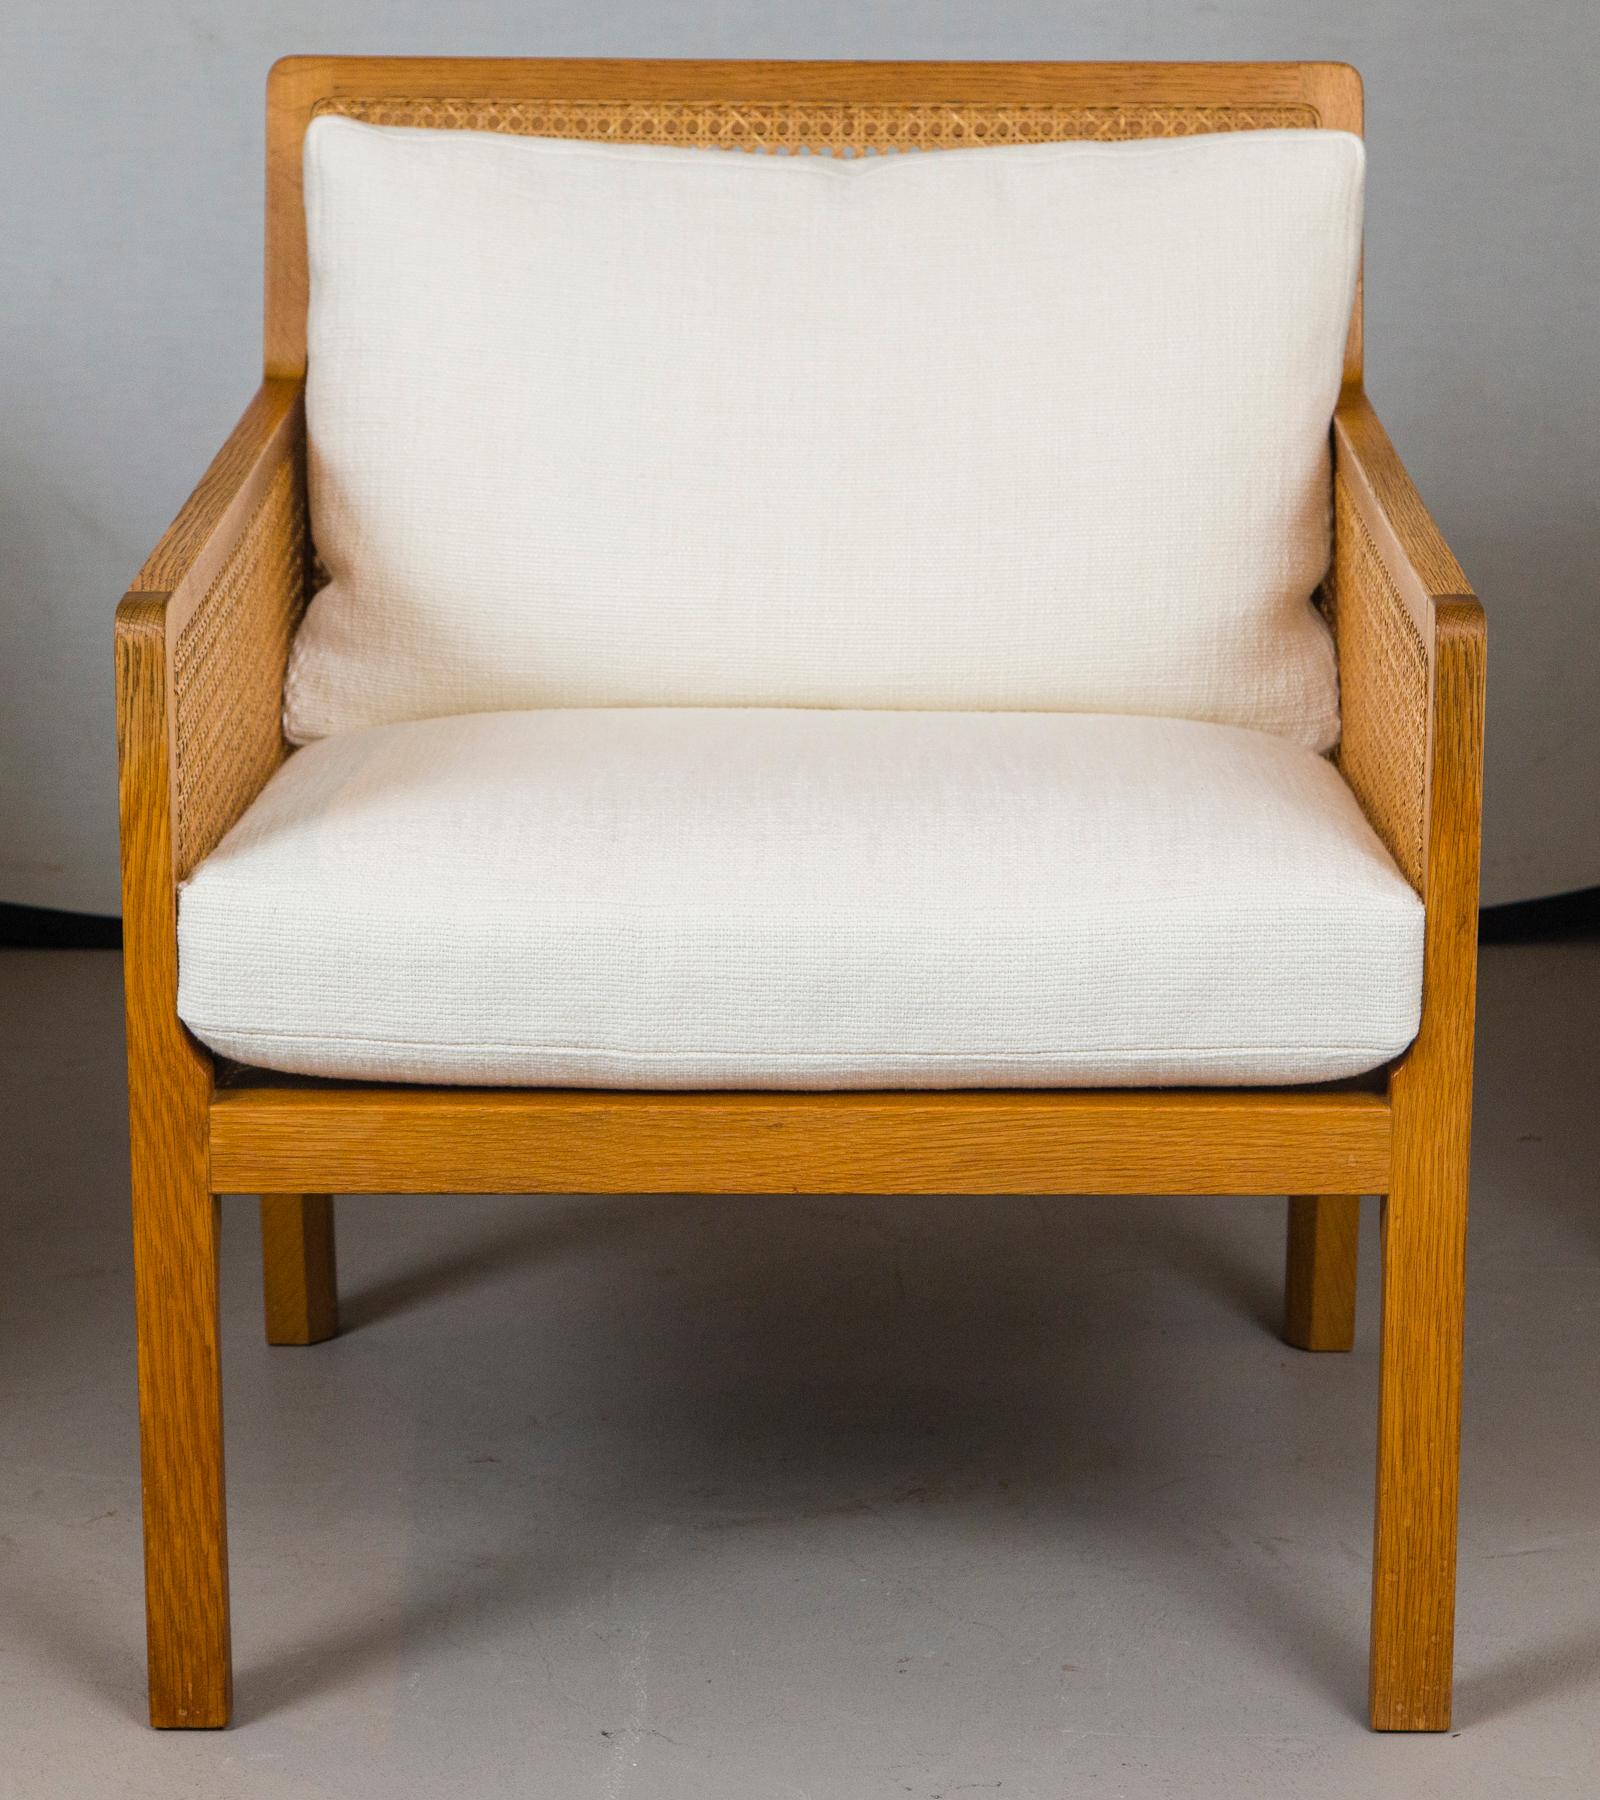 Pair of Bernt Petersen caned lounge chairs newly reupholstered in white Maharam linen

Bernt Petersen opened his own studio in 1963, after having worked for Hans Wegner. His designs are much admired for their highly-refined and deceptively simple